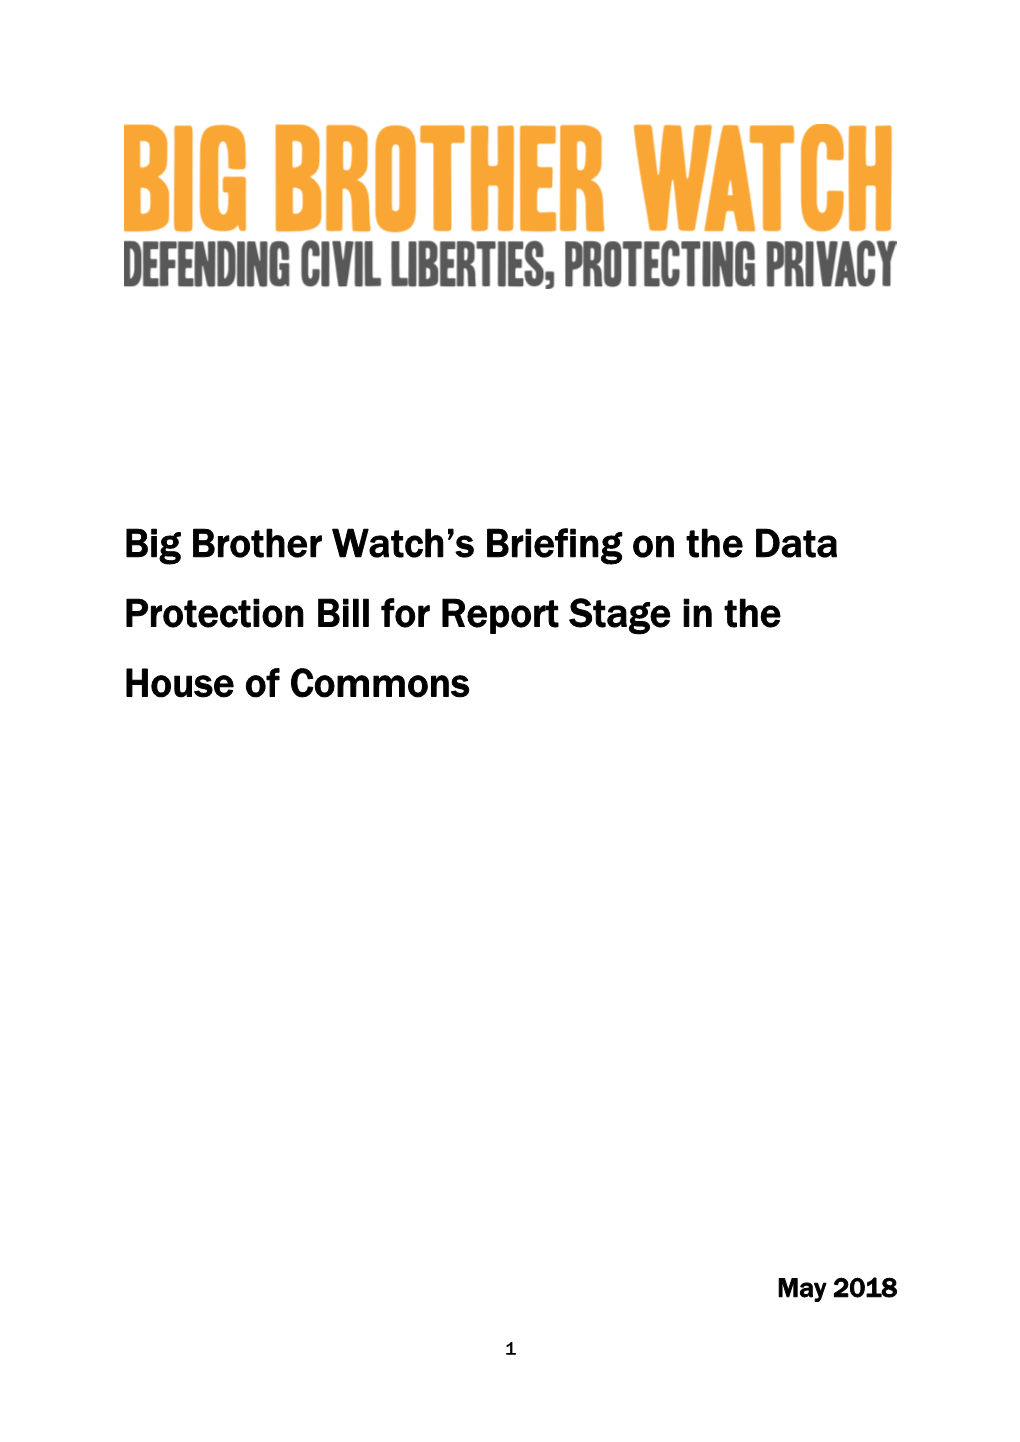 Data Protection Bill for Report Stage in the House of Commons